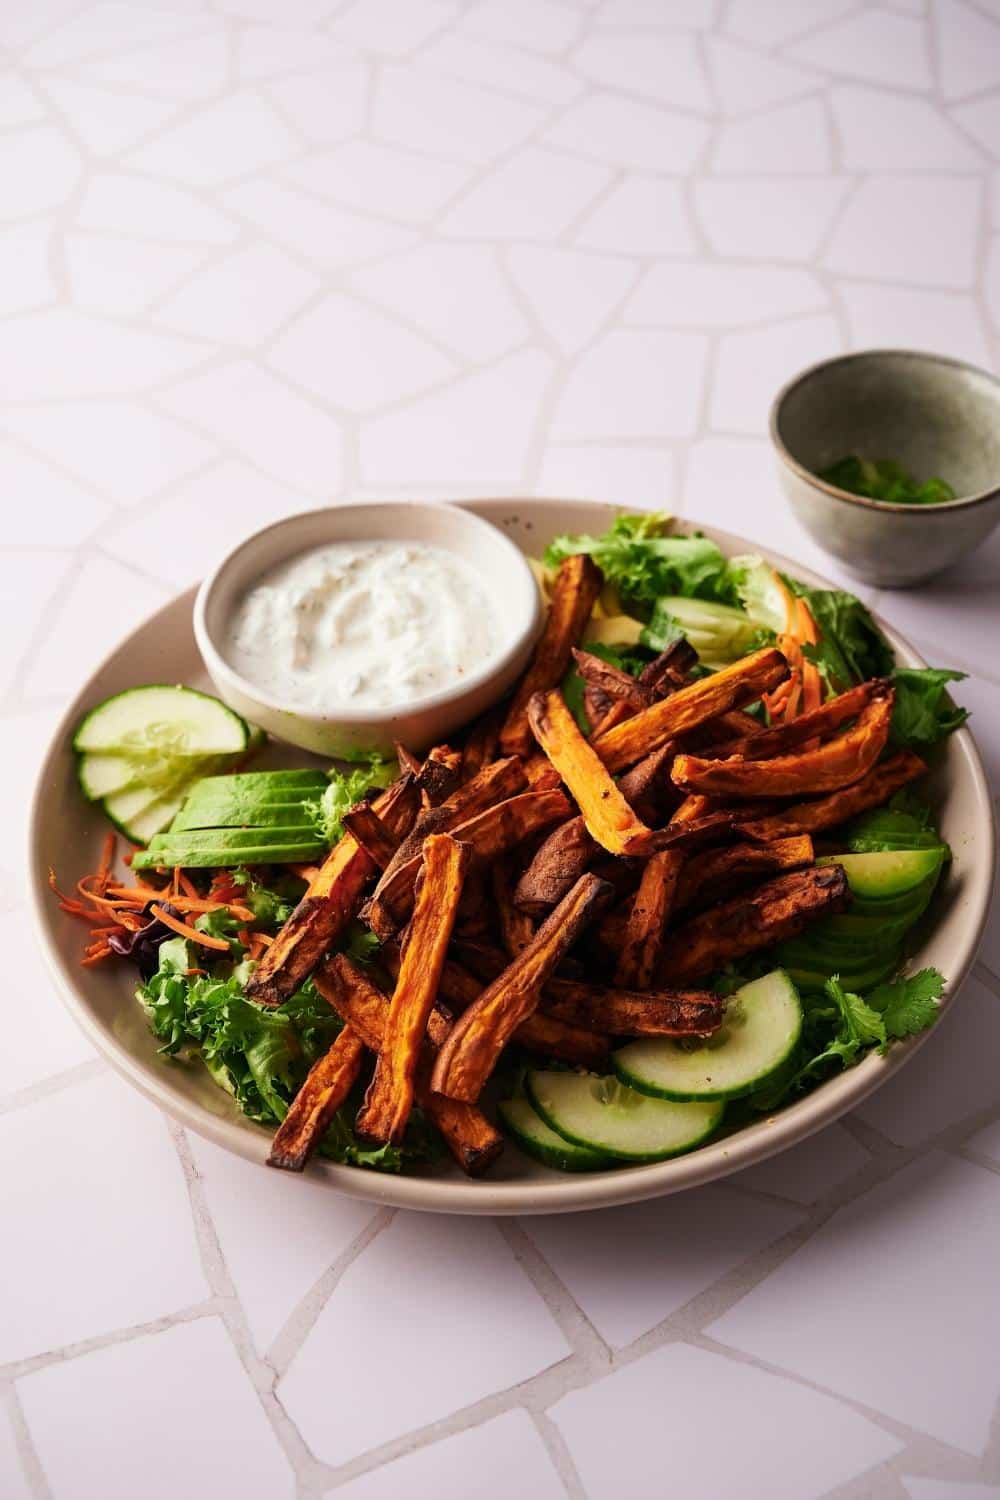 Air fried sweet potato fries on a bed of lettuce and cucumber slices with a small bowl of creamy dipping sauce.